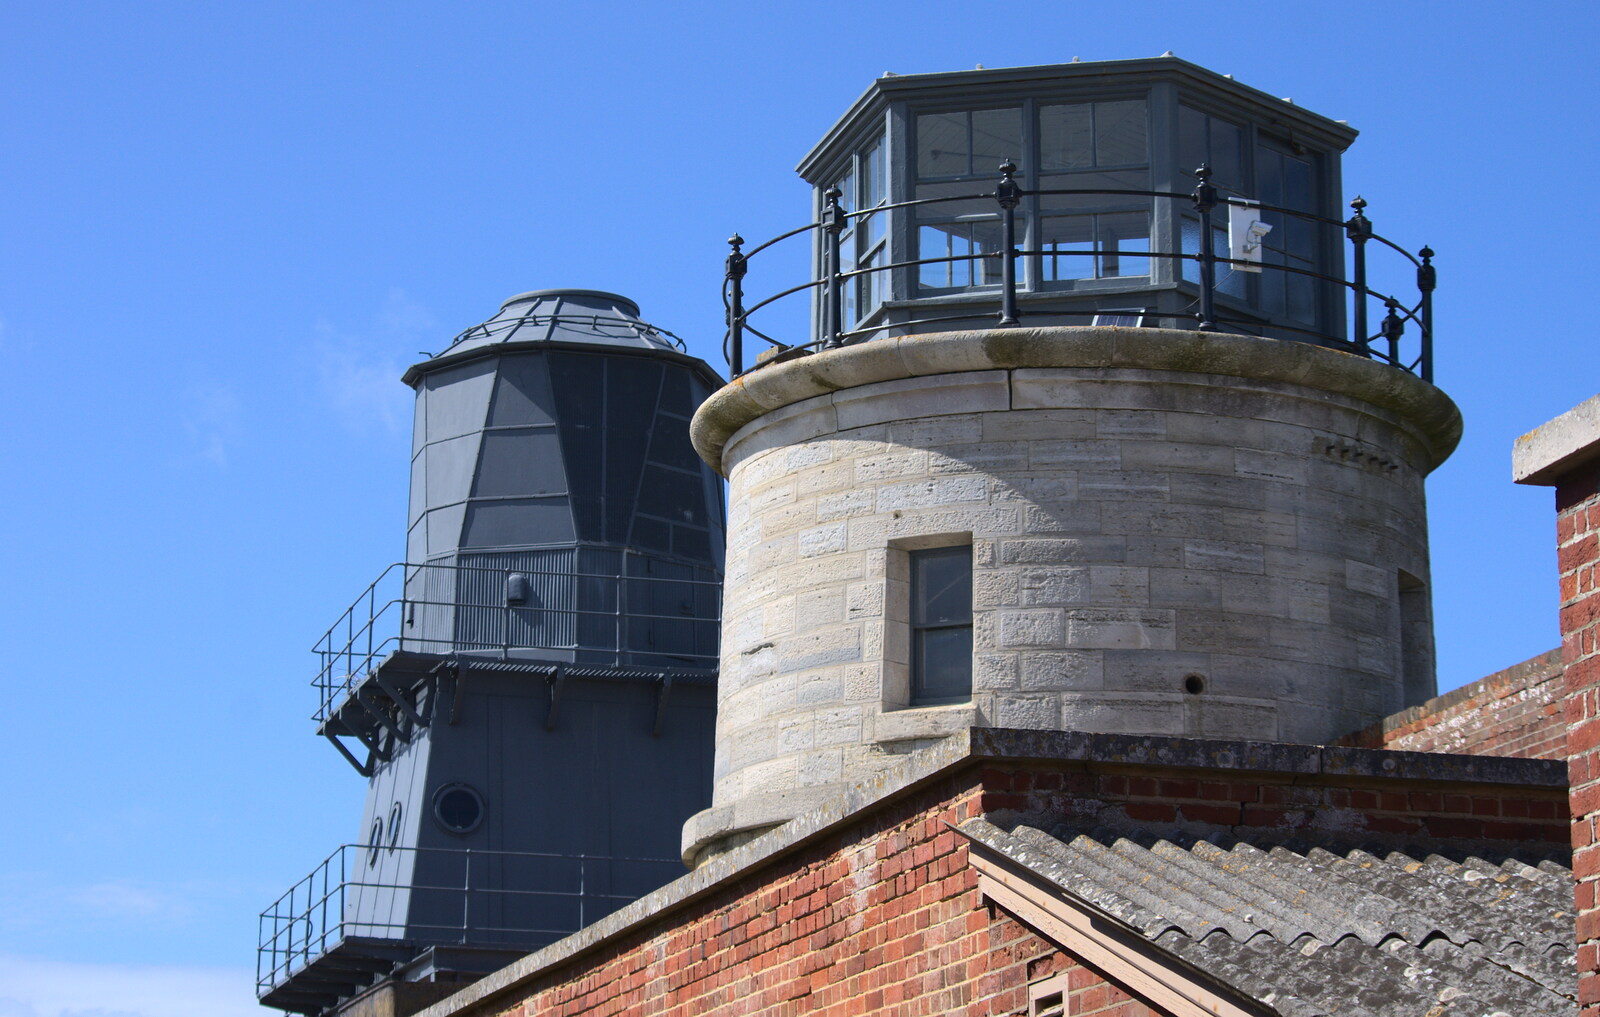 Lighthousey lookouts on Hurst Castle from A Trip to Hurst Castle, Keyhaven, Hampshire - 28th August 2015